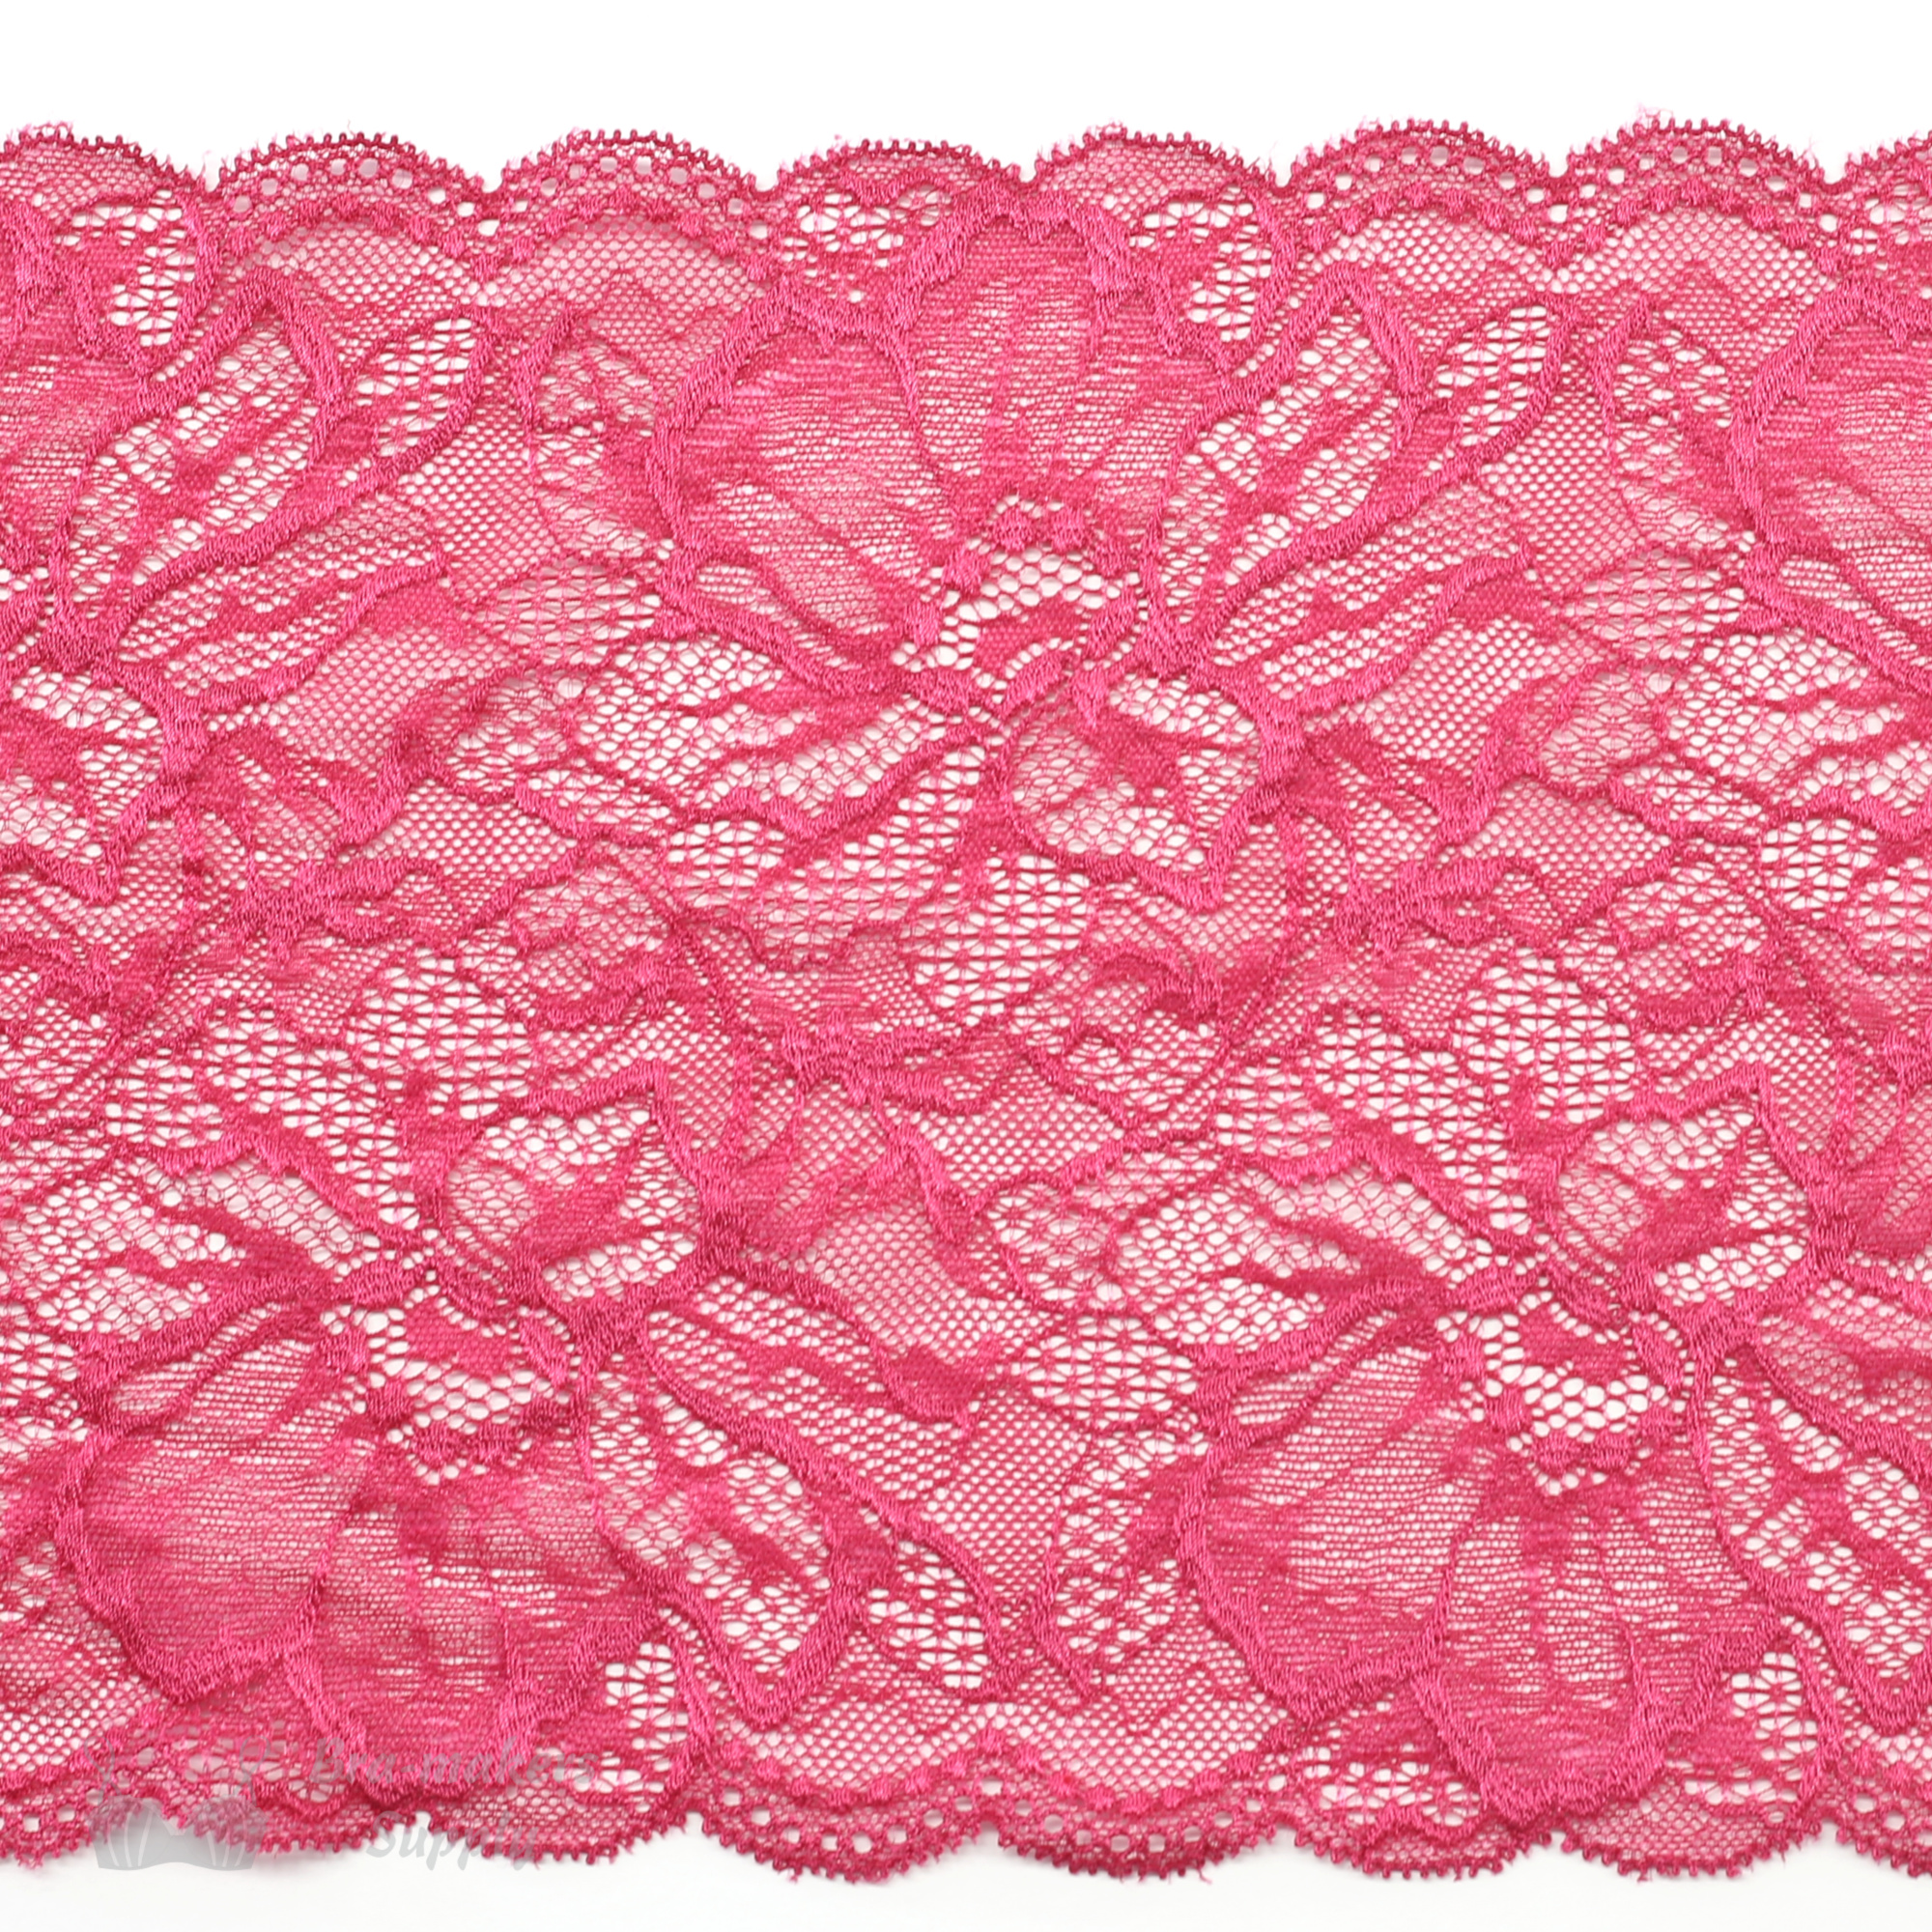 Hot Pink Petal Wave Stretch Lace - 7 Wide - 1 Yard